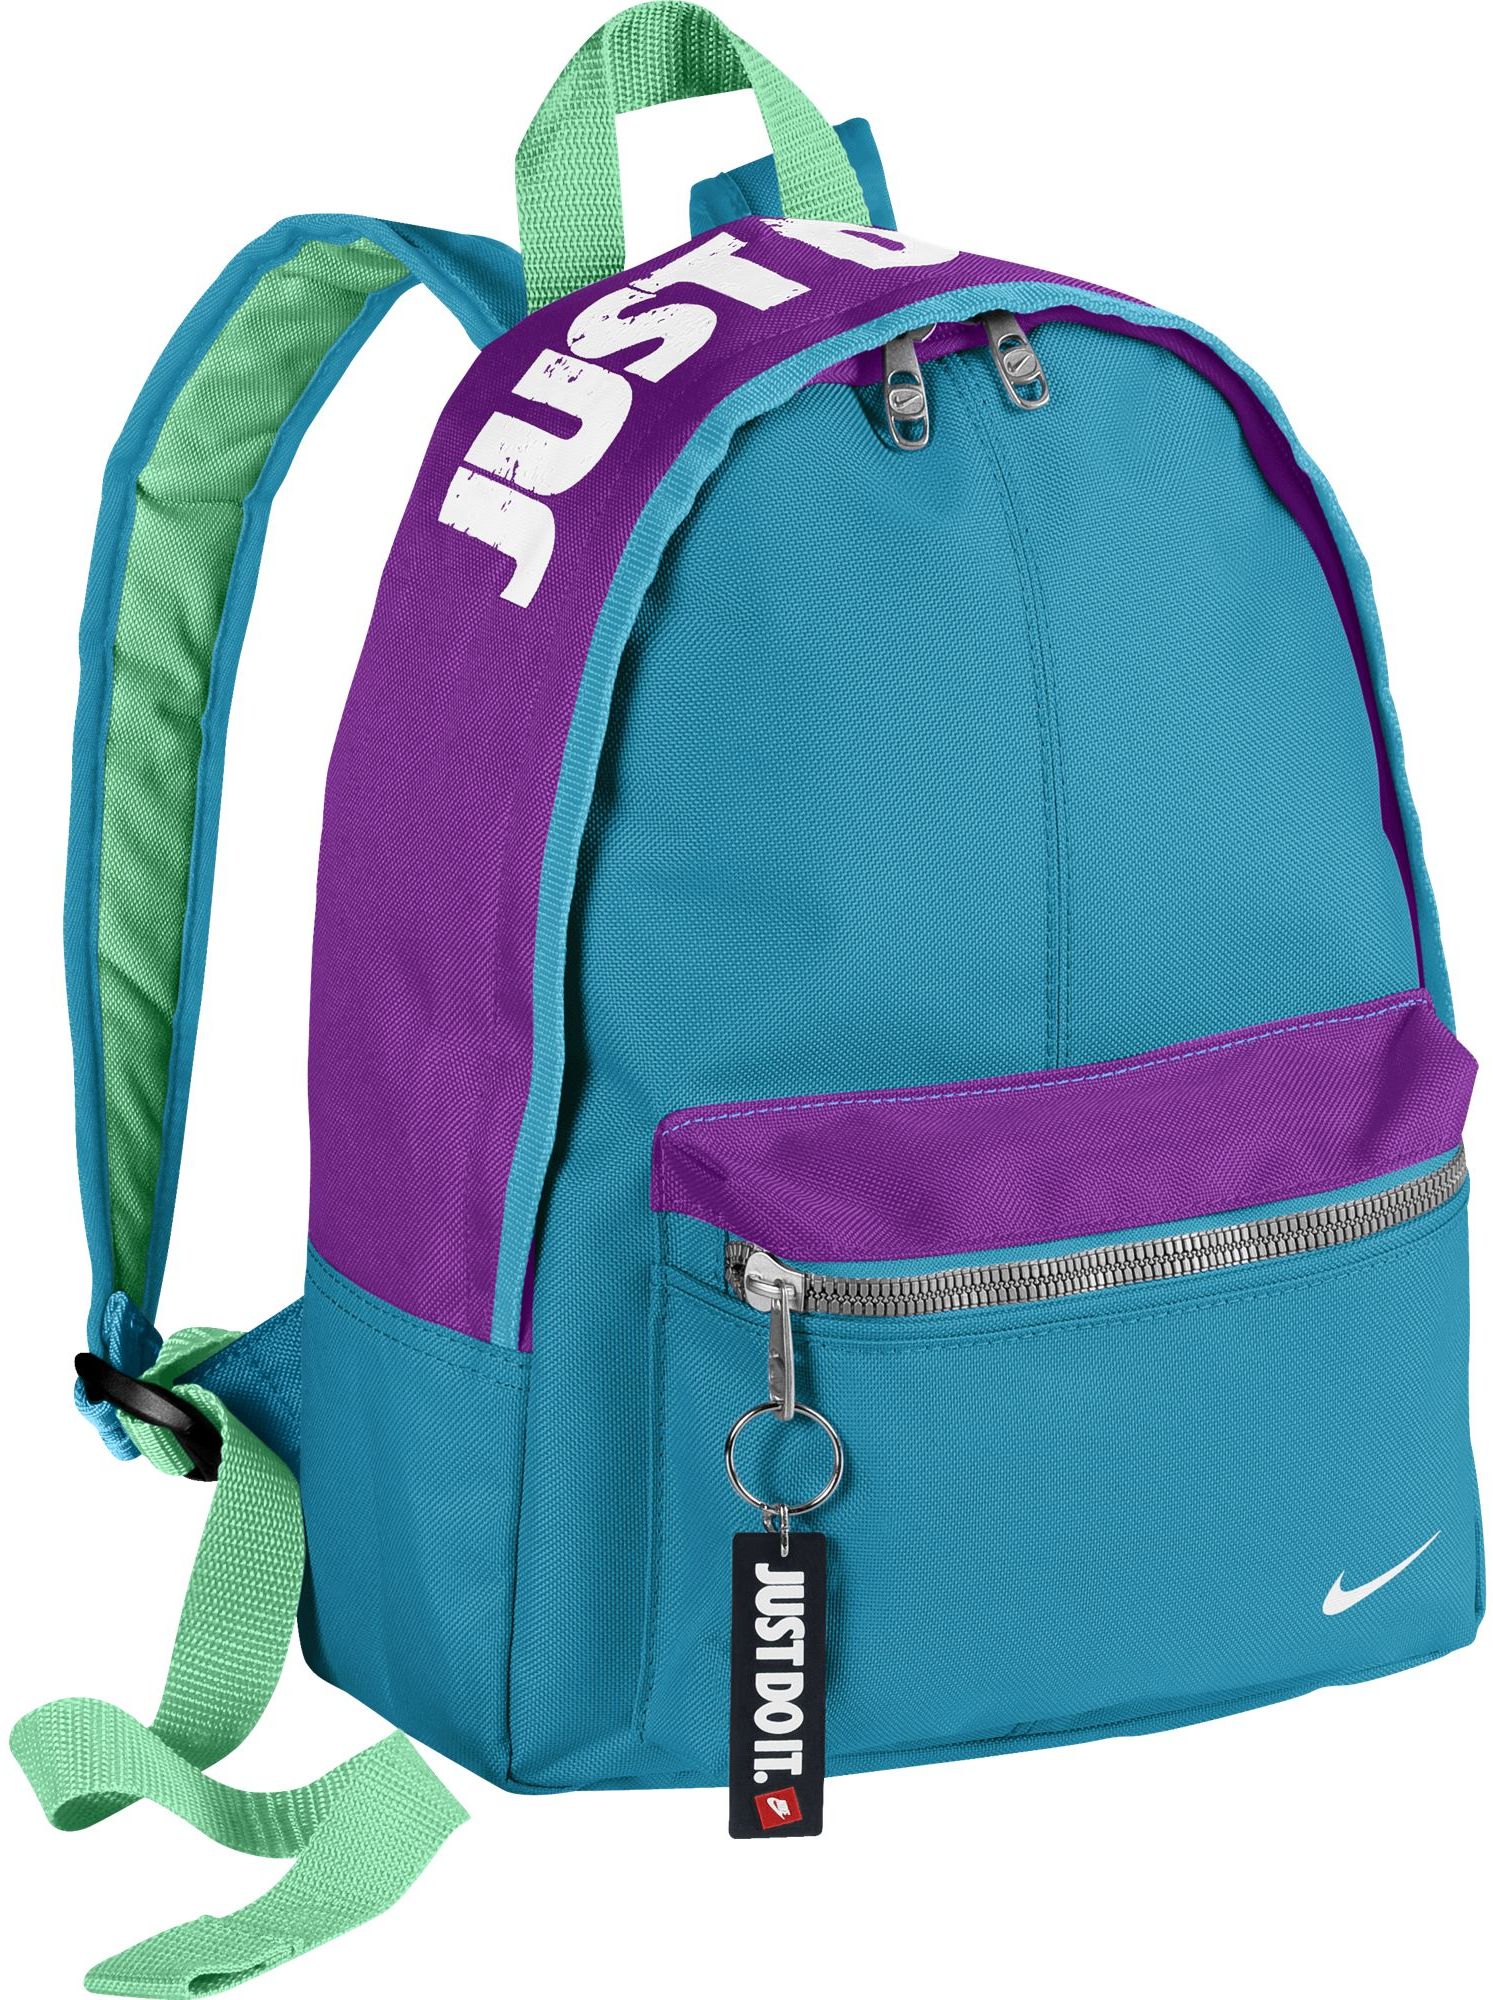 YOUNG ATHLETES CLAS - Rucksack